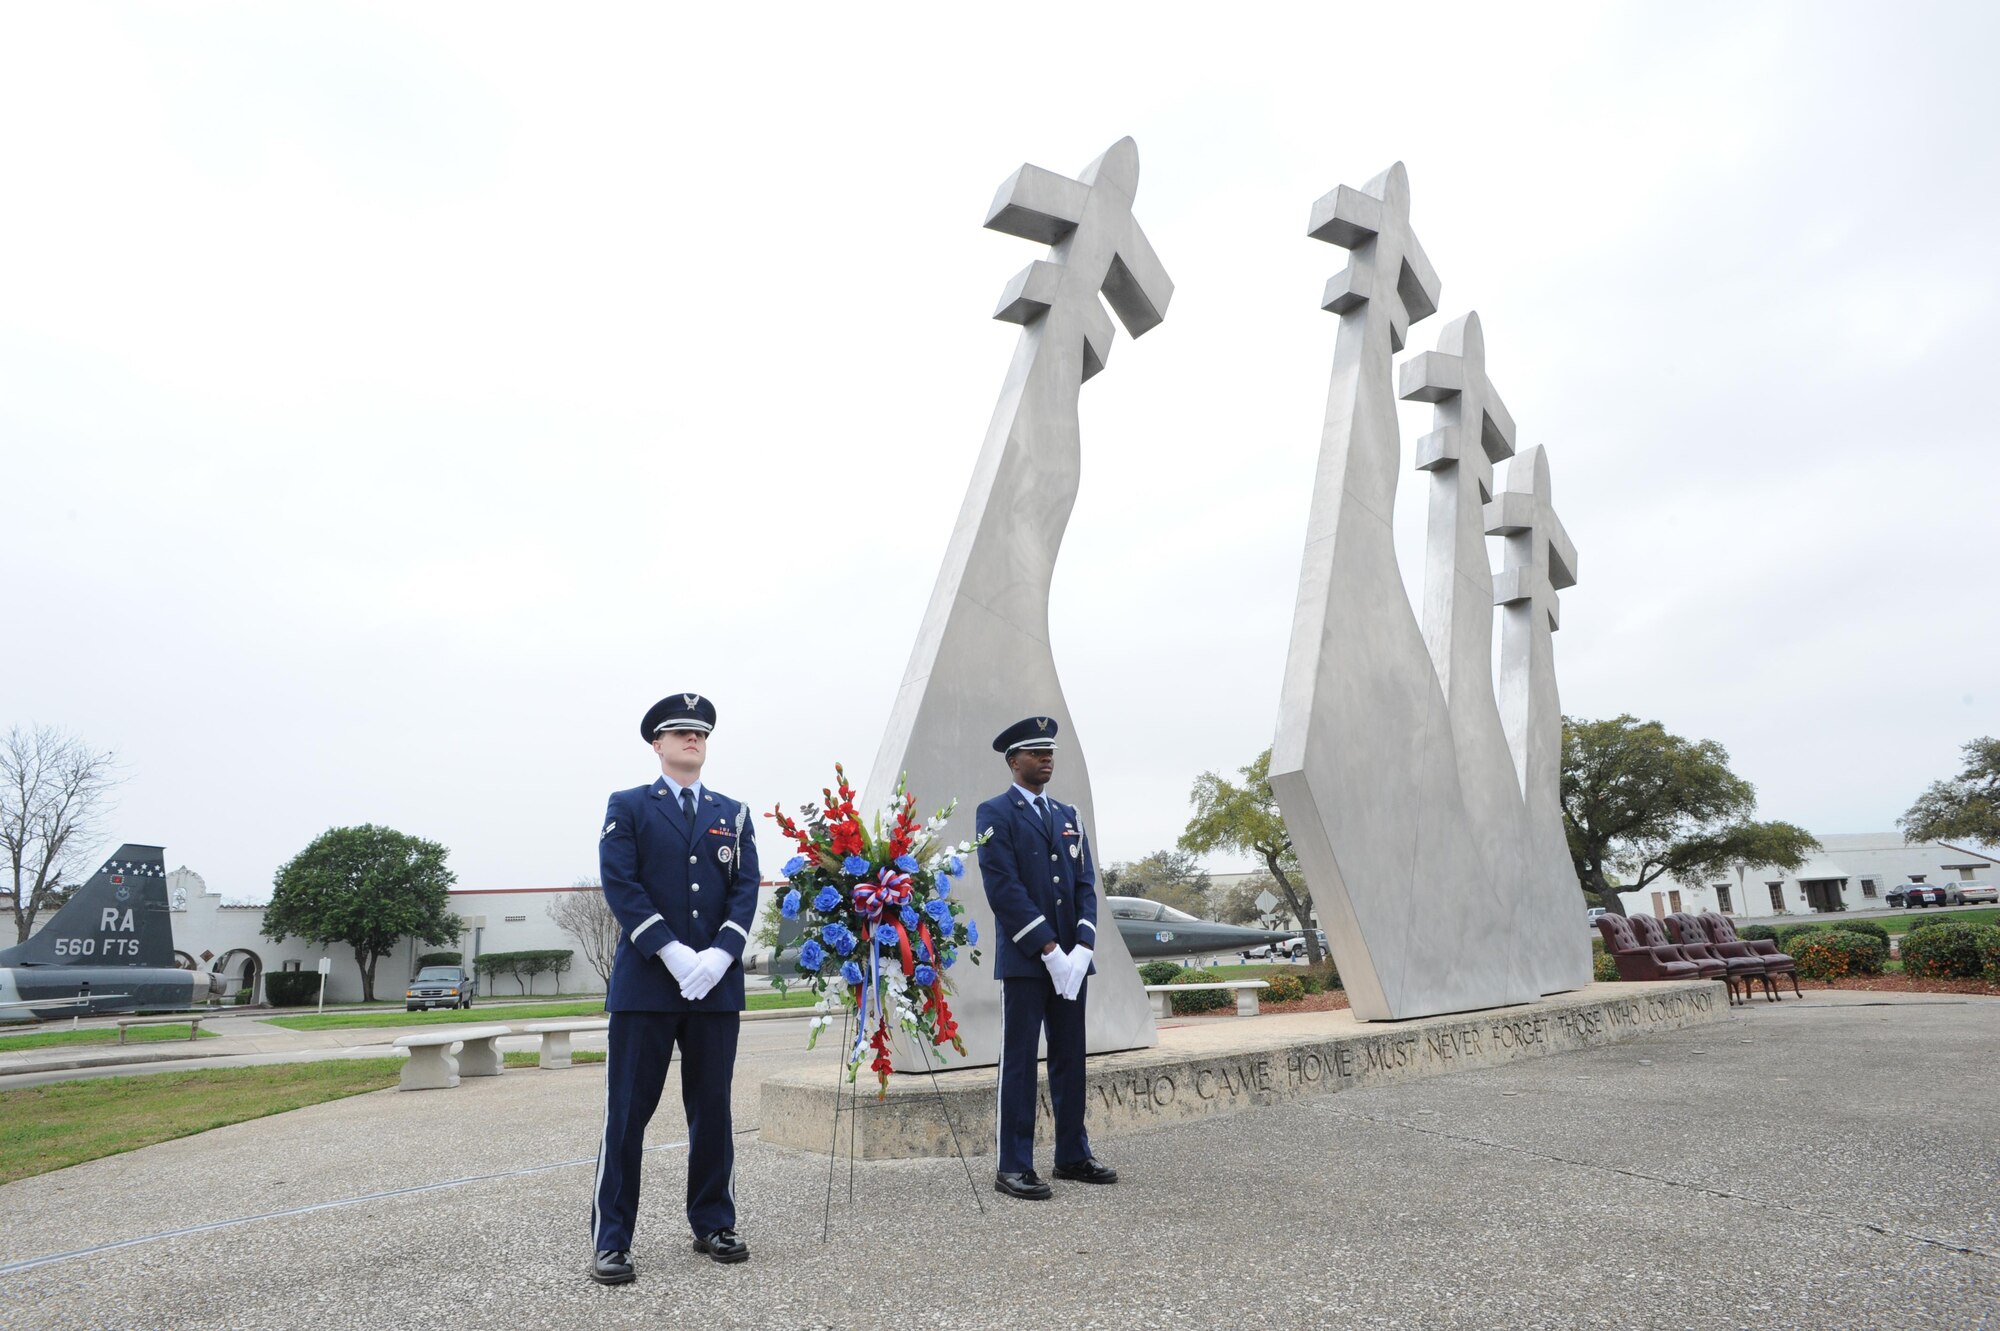 Airman 1st Class Hayden Tondee (left) and Senior Airman Willie Muhammad (right), Joint Base San Antonio Honor Guard members, stand at the Missing Man Memorial before the wreath laying ceremony, which was held in conjunction with the 42nd Freedom Flyer Reunion March 20 at JBSA-Randolph. (U.S. Air Photo by Melissa Peterson)